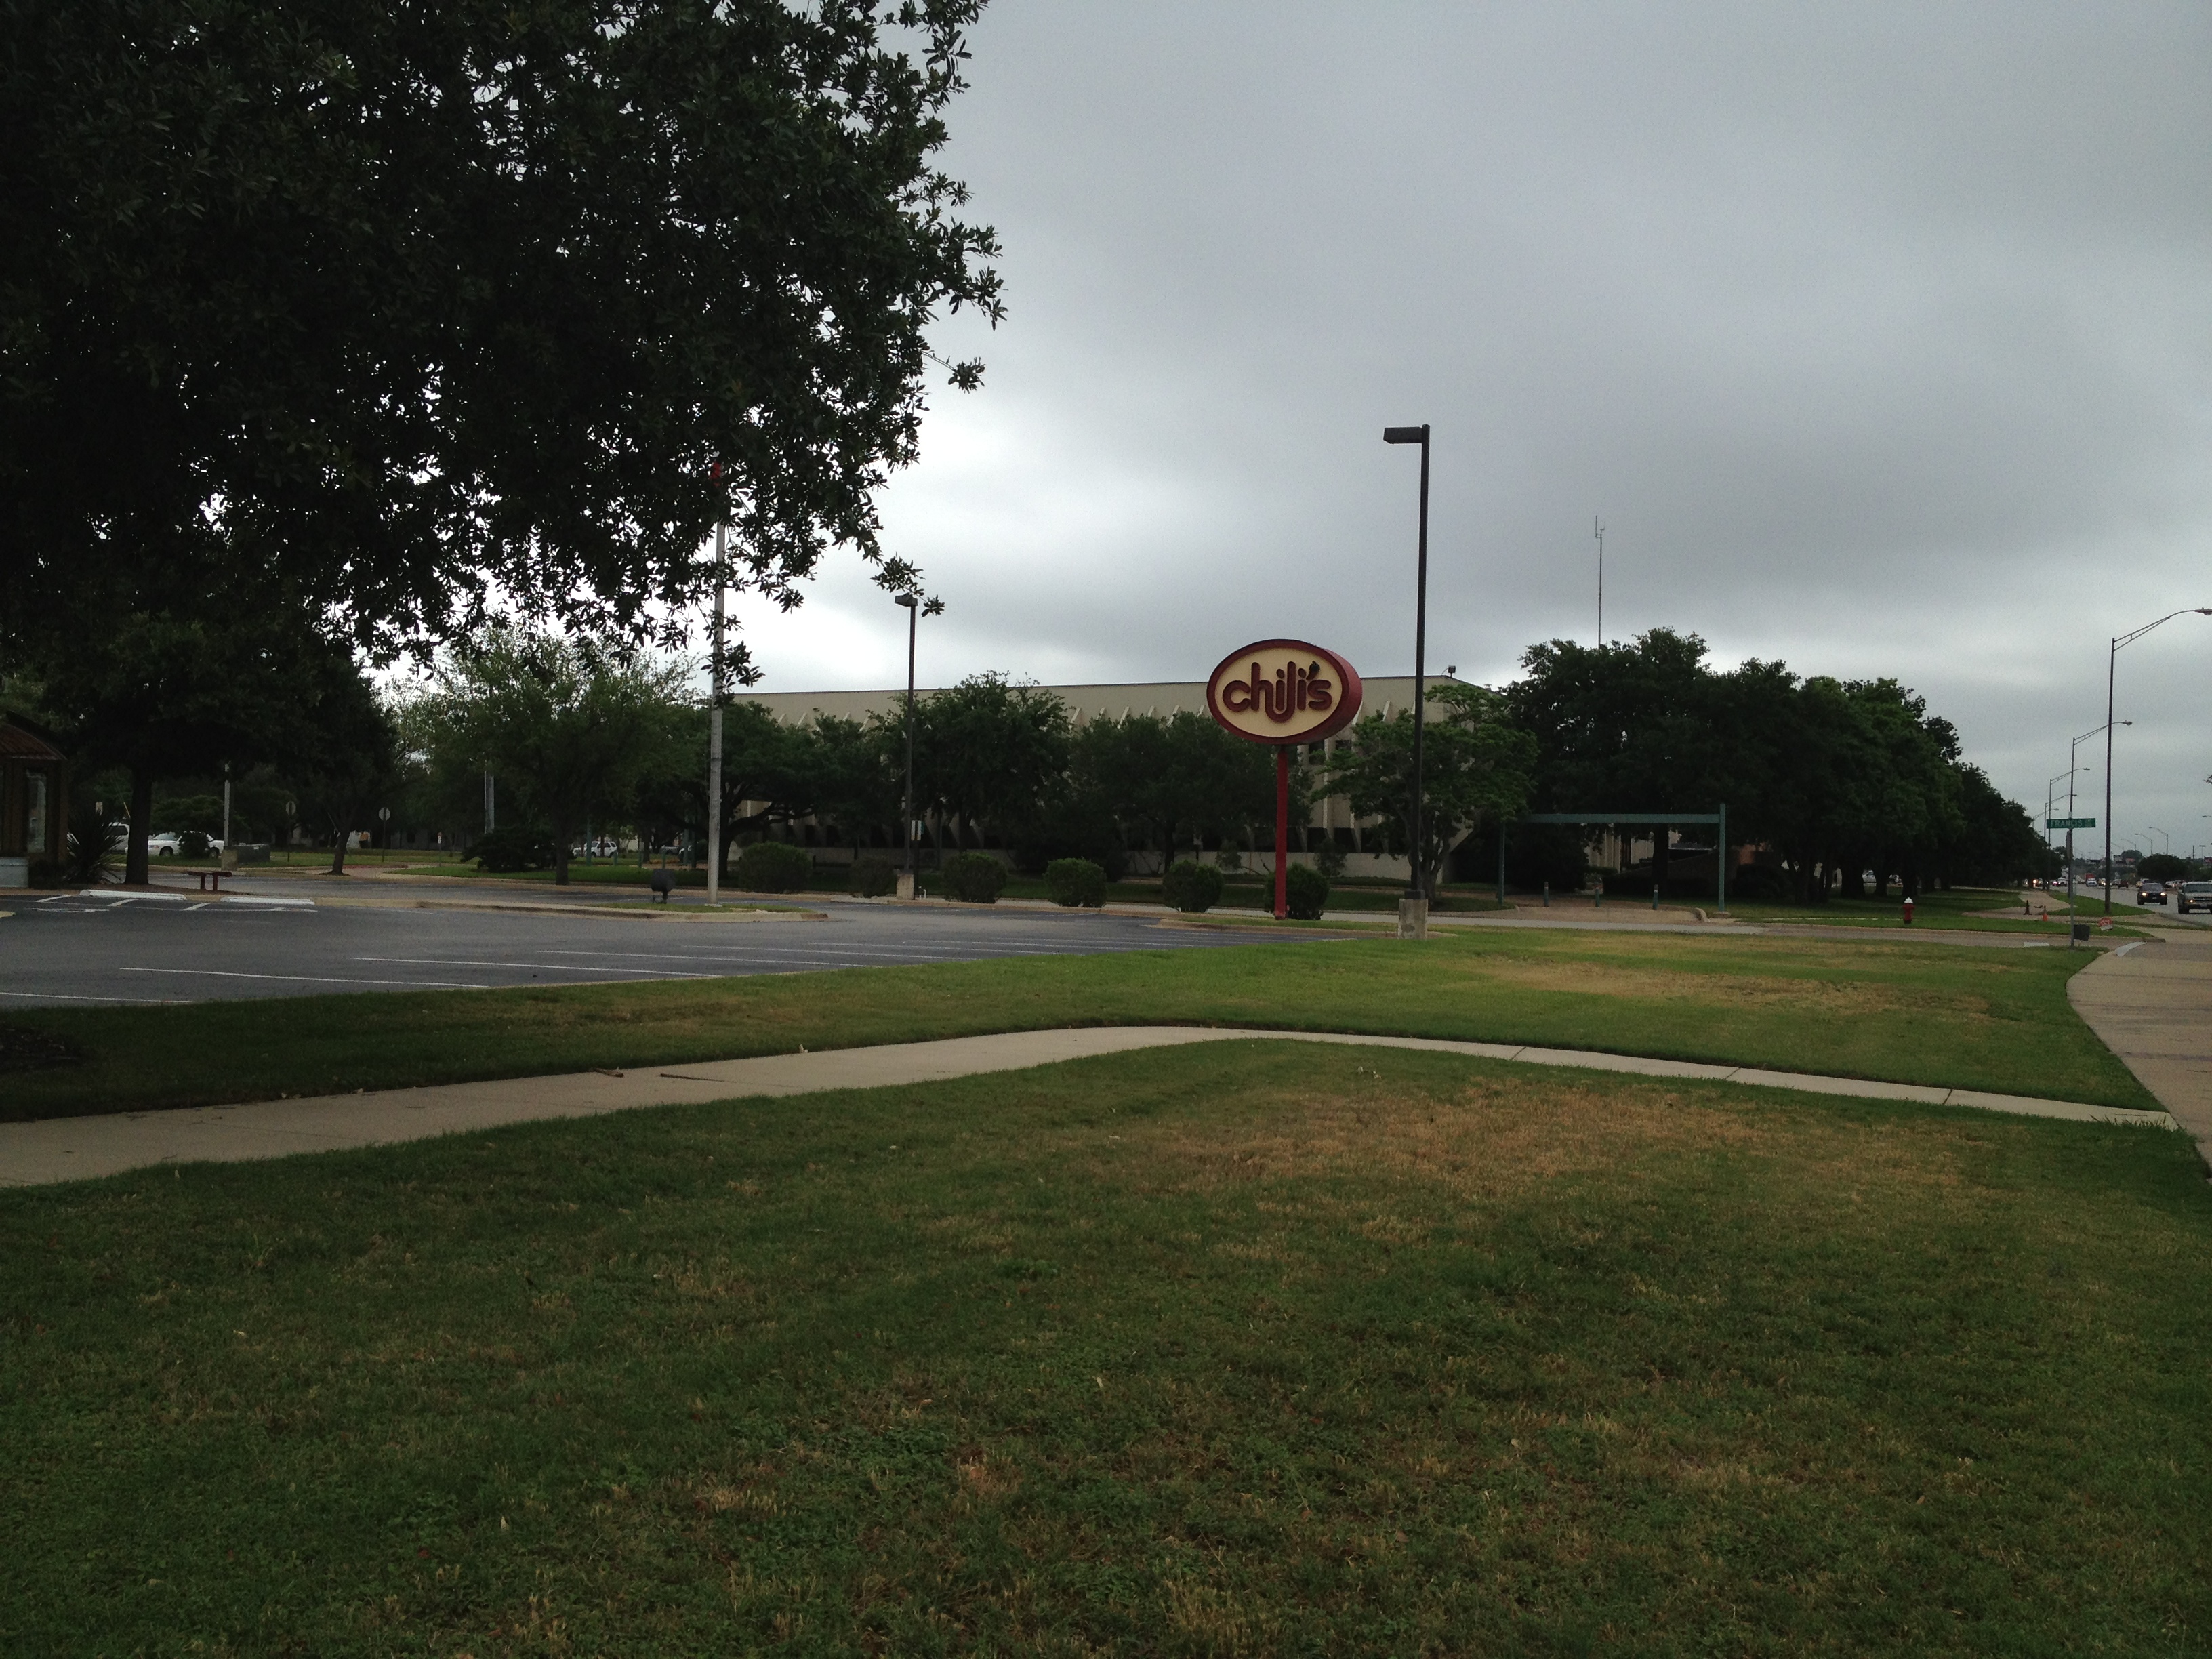 Chilis Sign May 2014 A Recent Visit To Dallas Showed That The